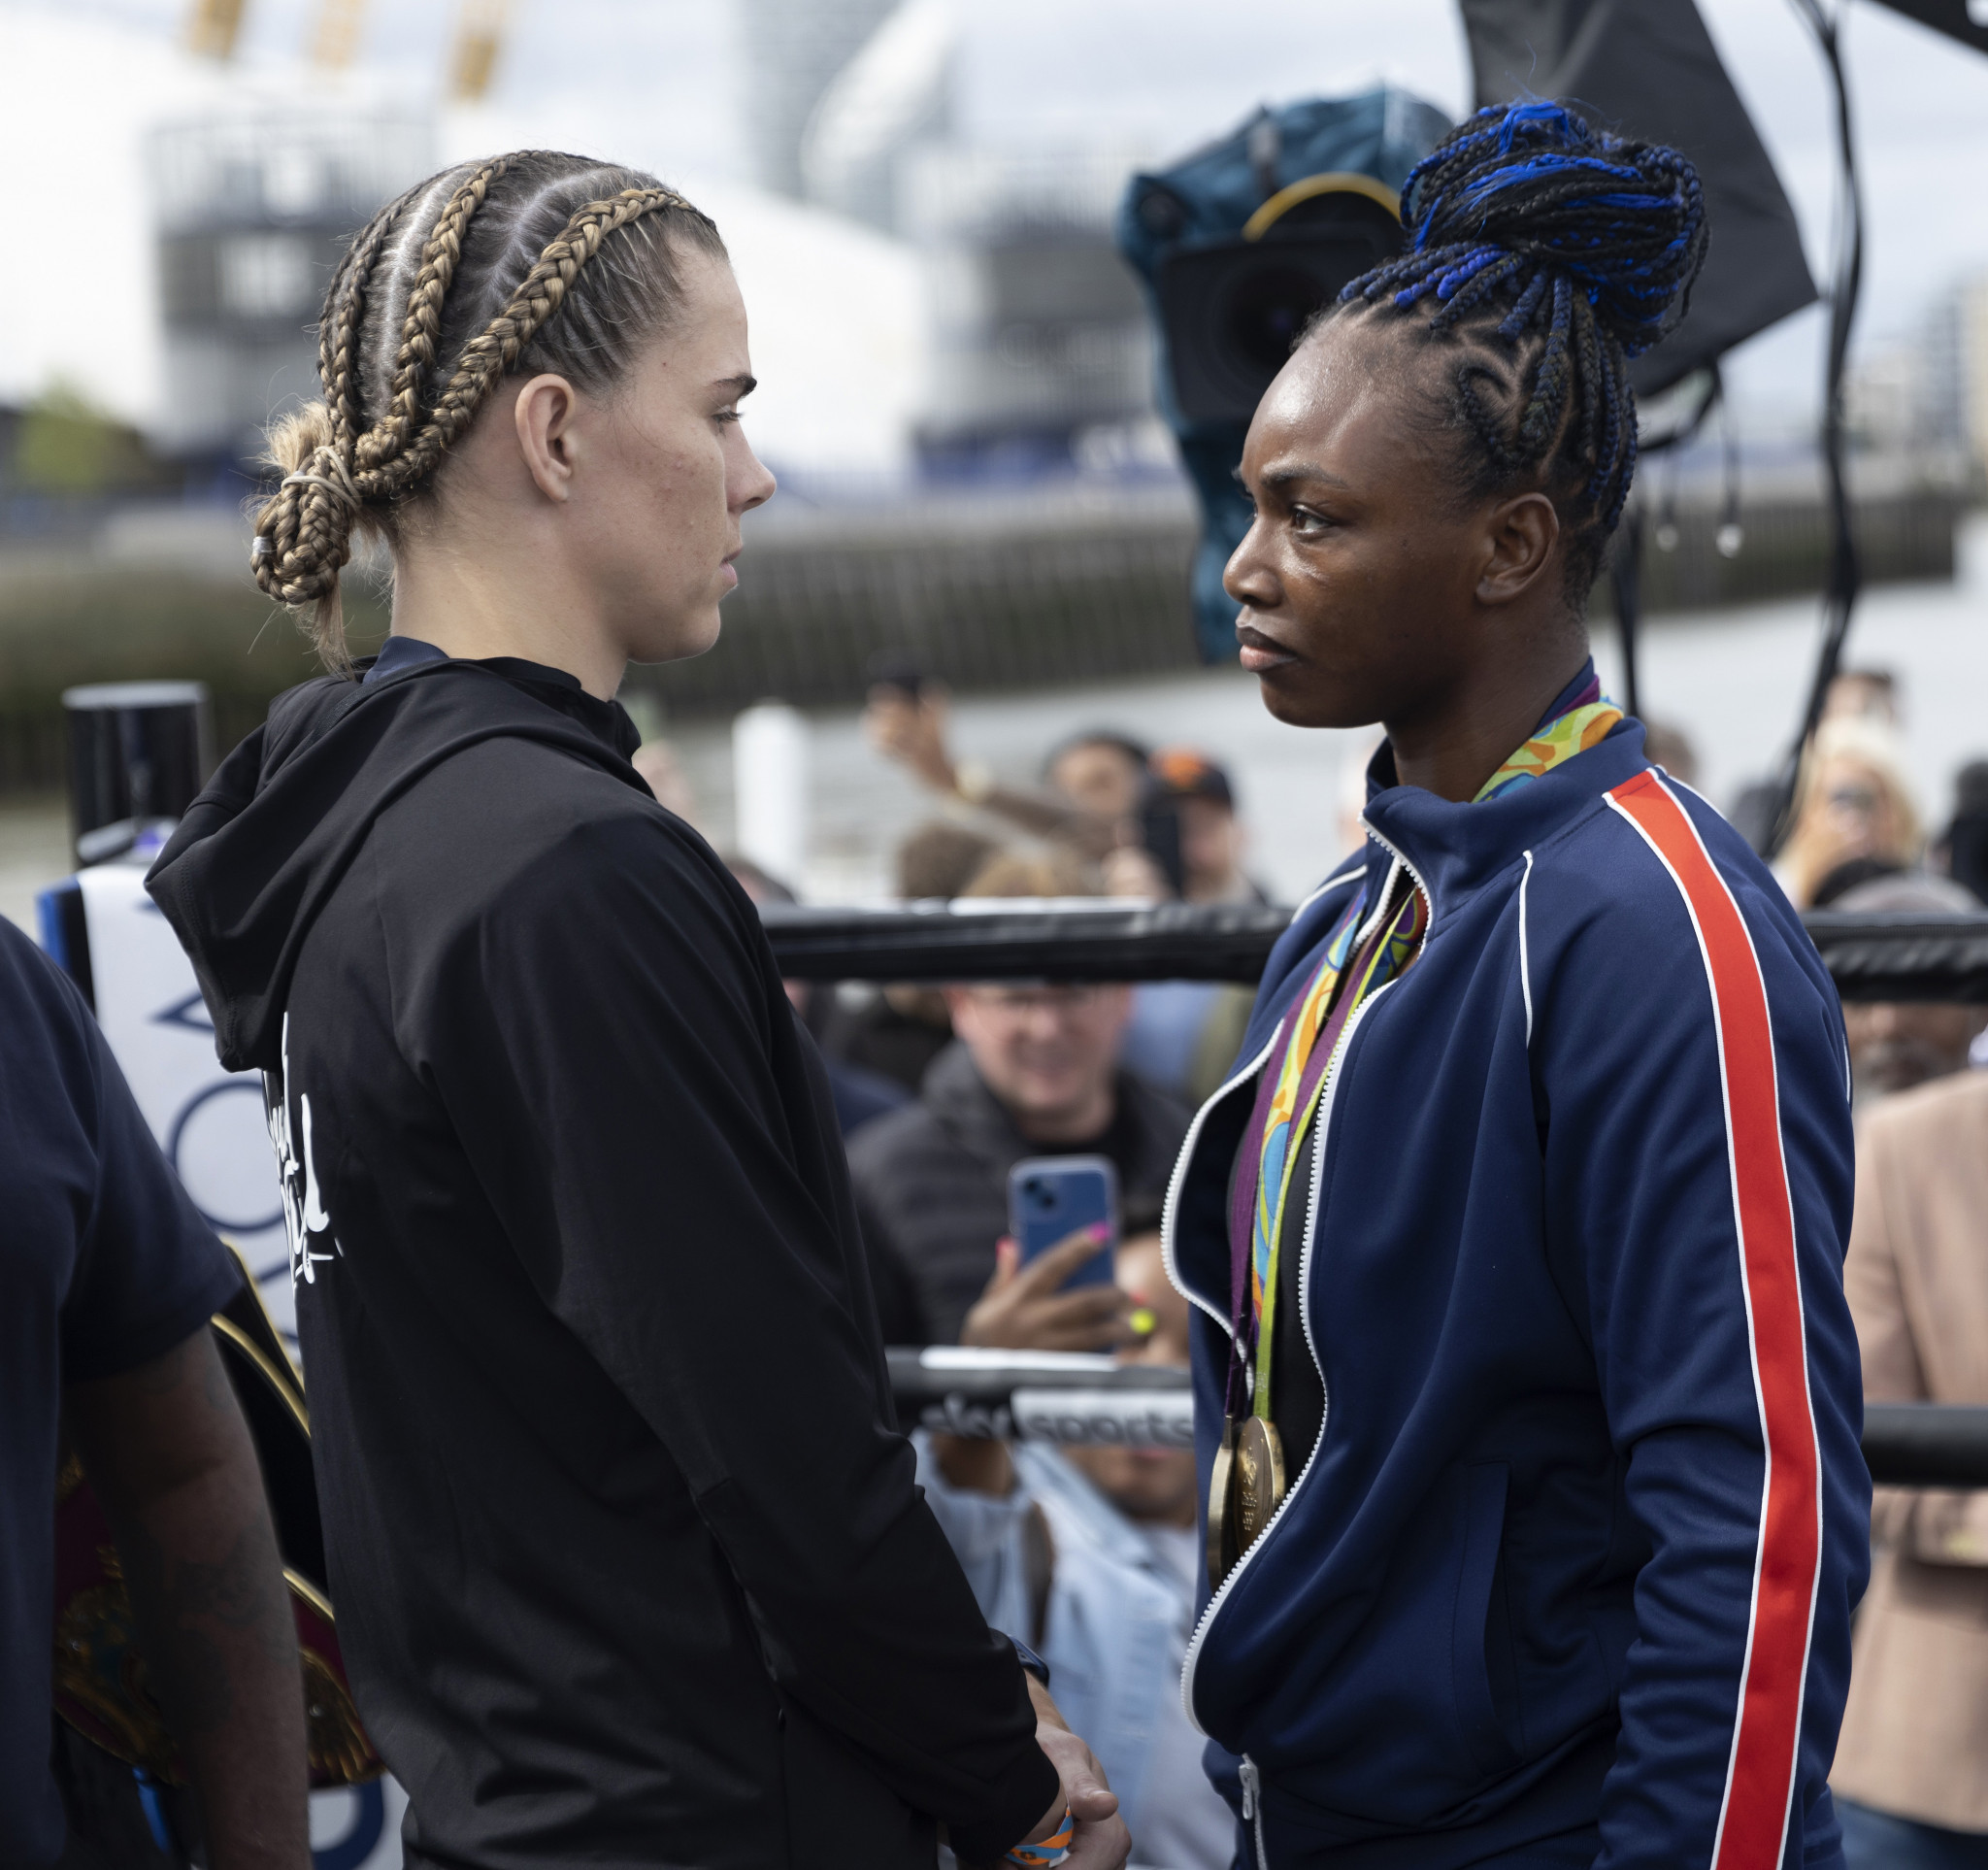 Savannah Marshall, left, and Claressa Shields are due to fight in a delayed world title fight this weekend ©Getty Images